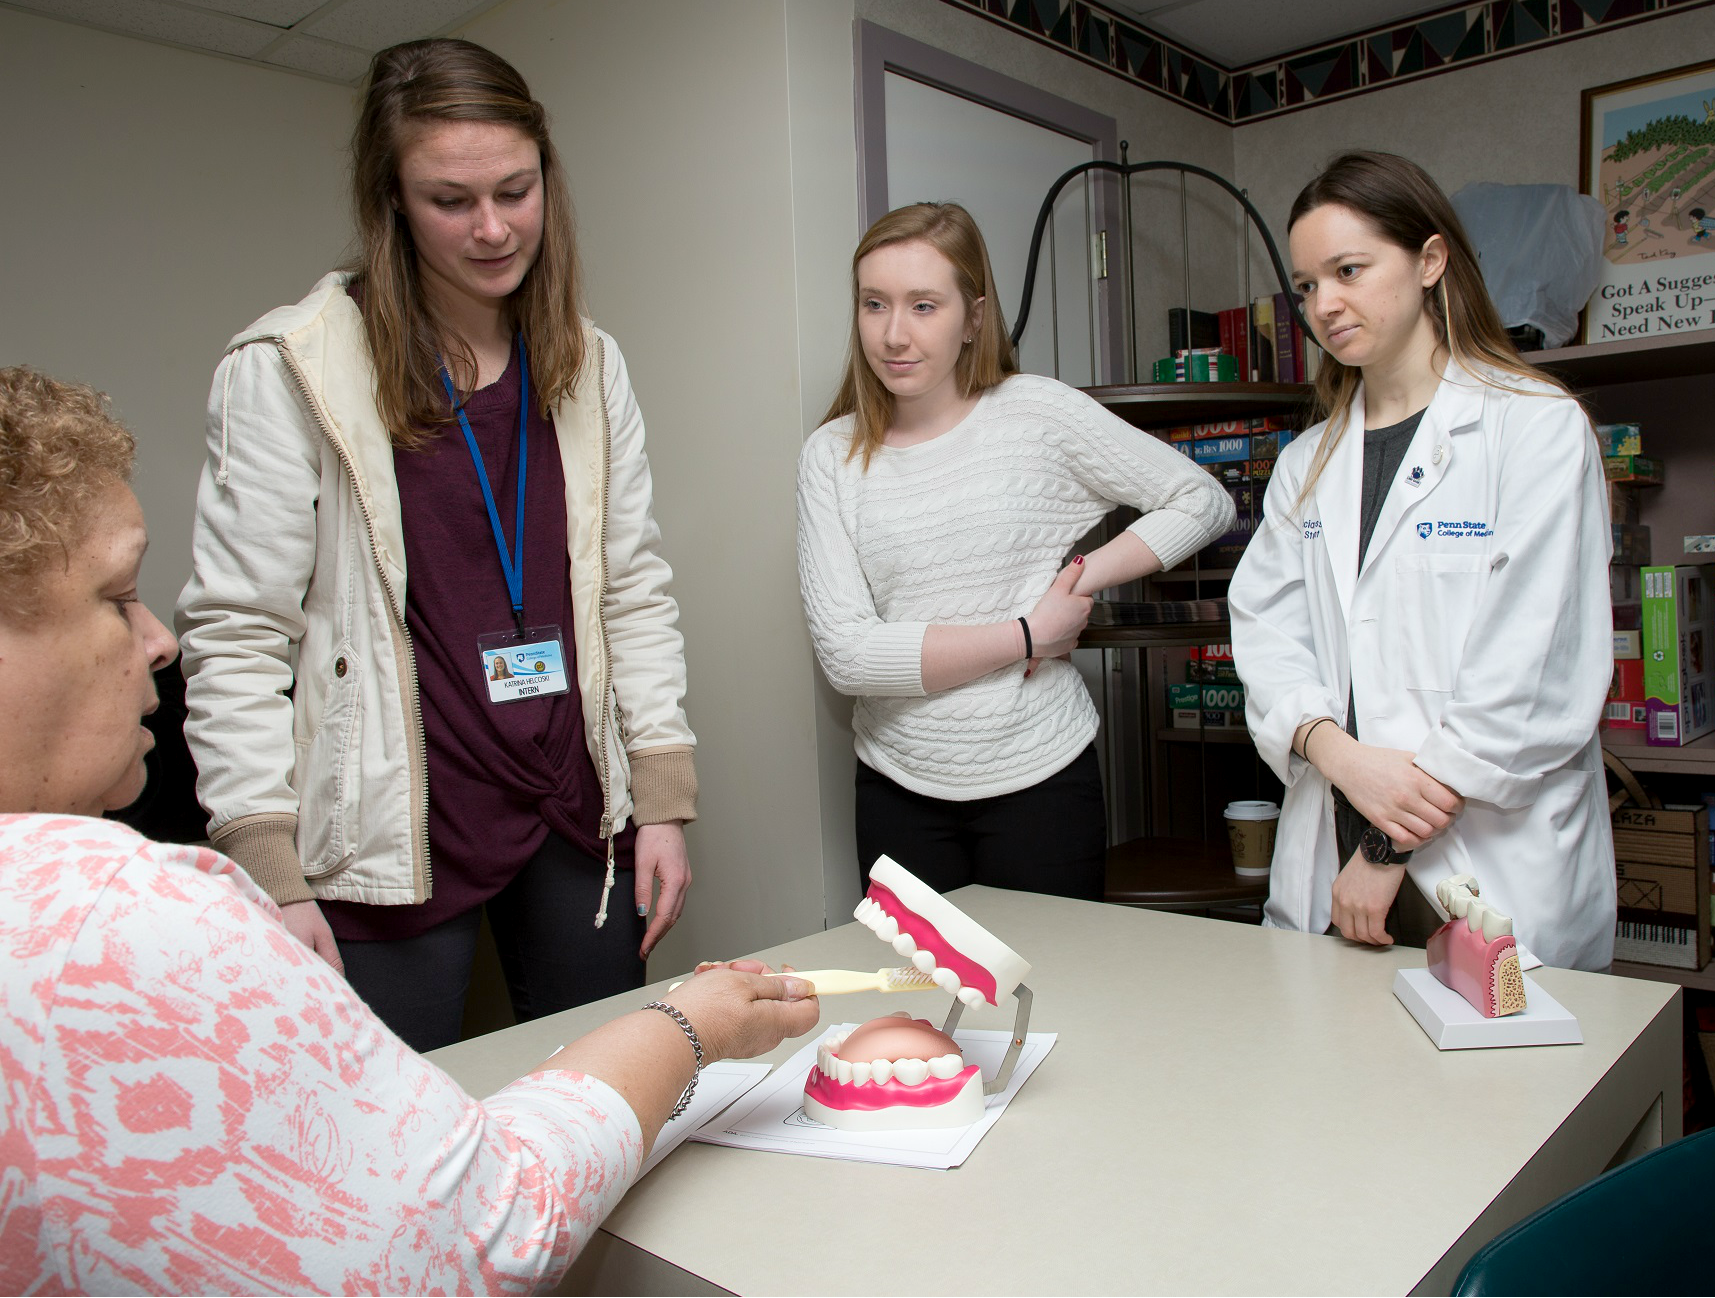 Hershey Plaza Apartments resident Millie Taylor sits at a table and practices brushing a large set of plastic teeth as Penn State College of Medicine students look on. Taylor is wearing a patterned blouse, From left, the students are wearing a sweater jacket, a sweater and a lab coat. Behind them are bookshelves filled with books and games.